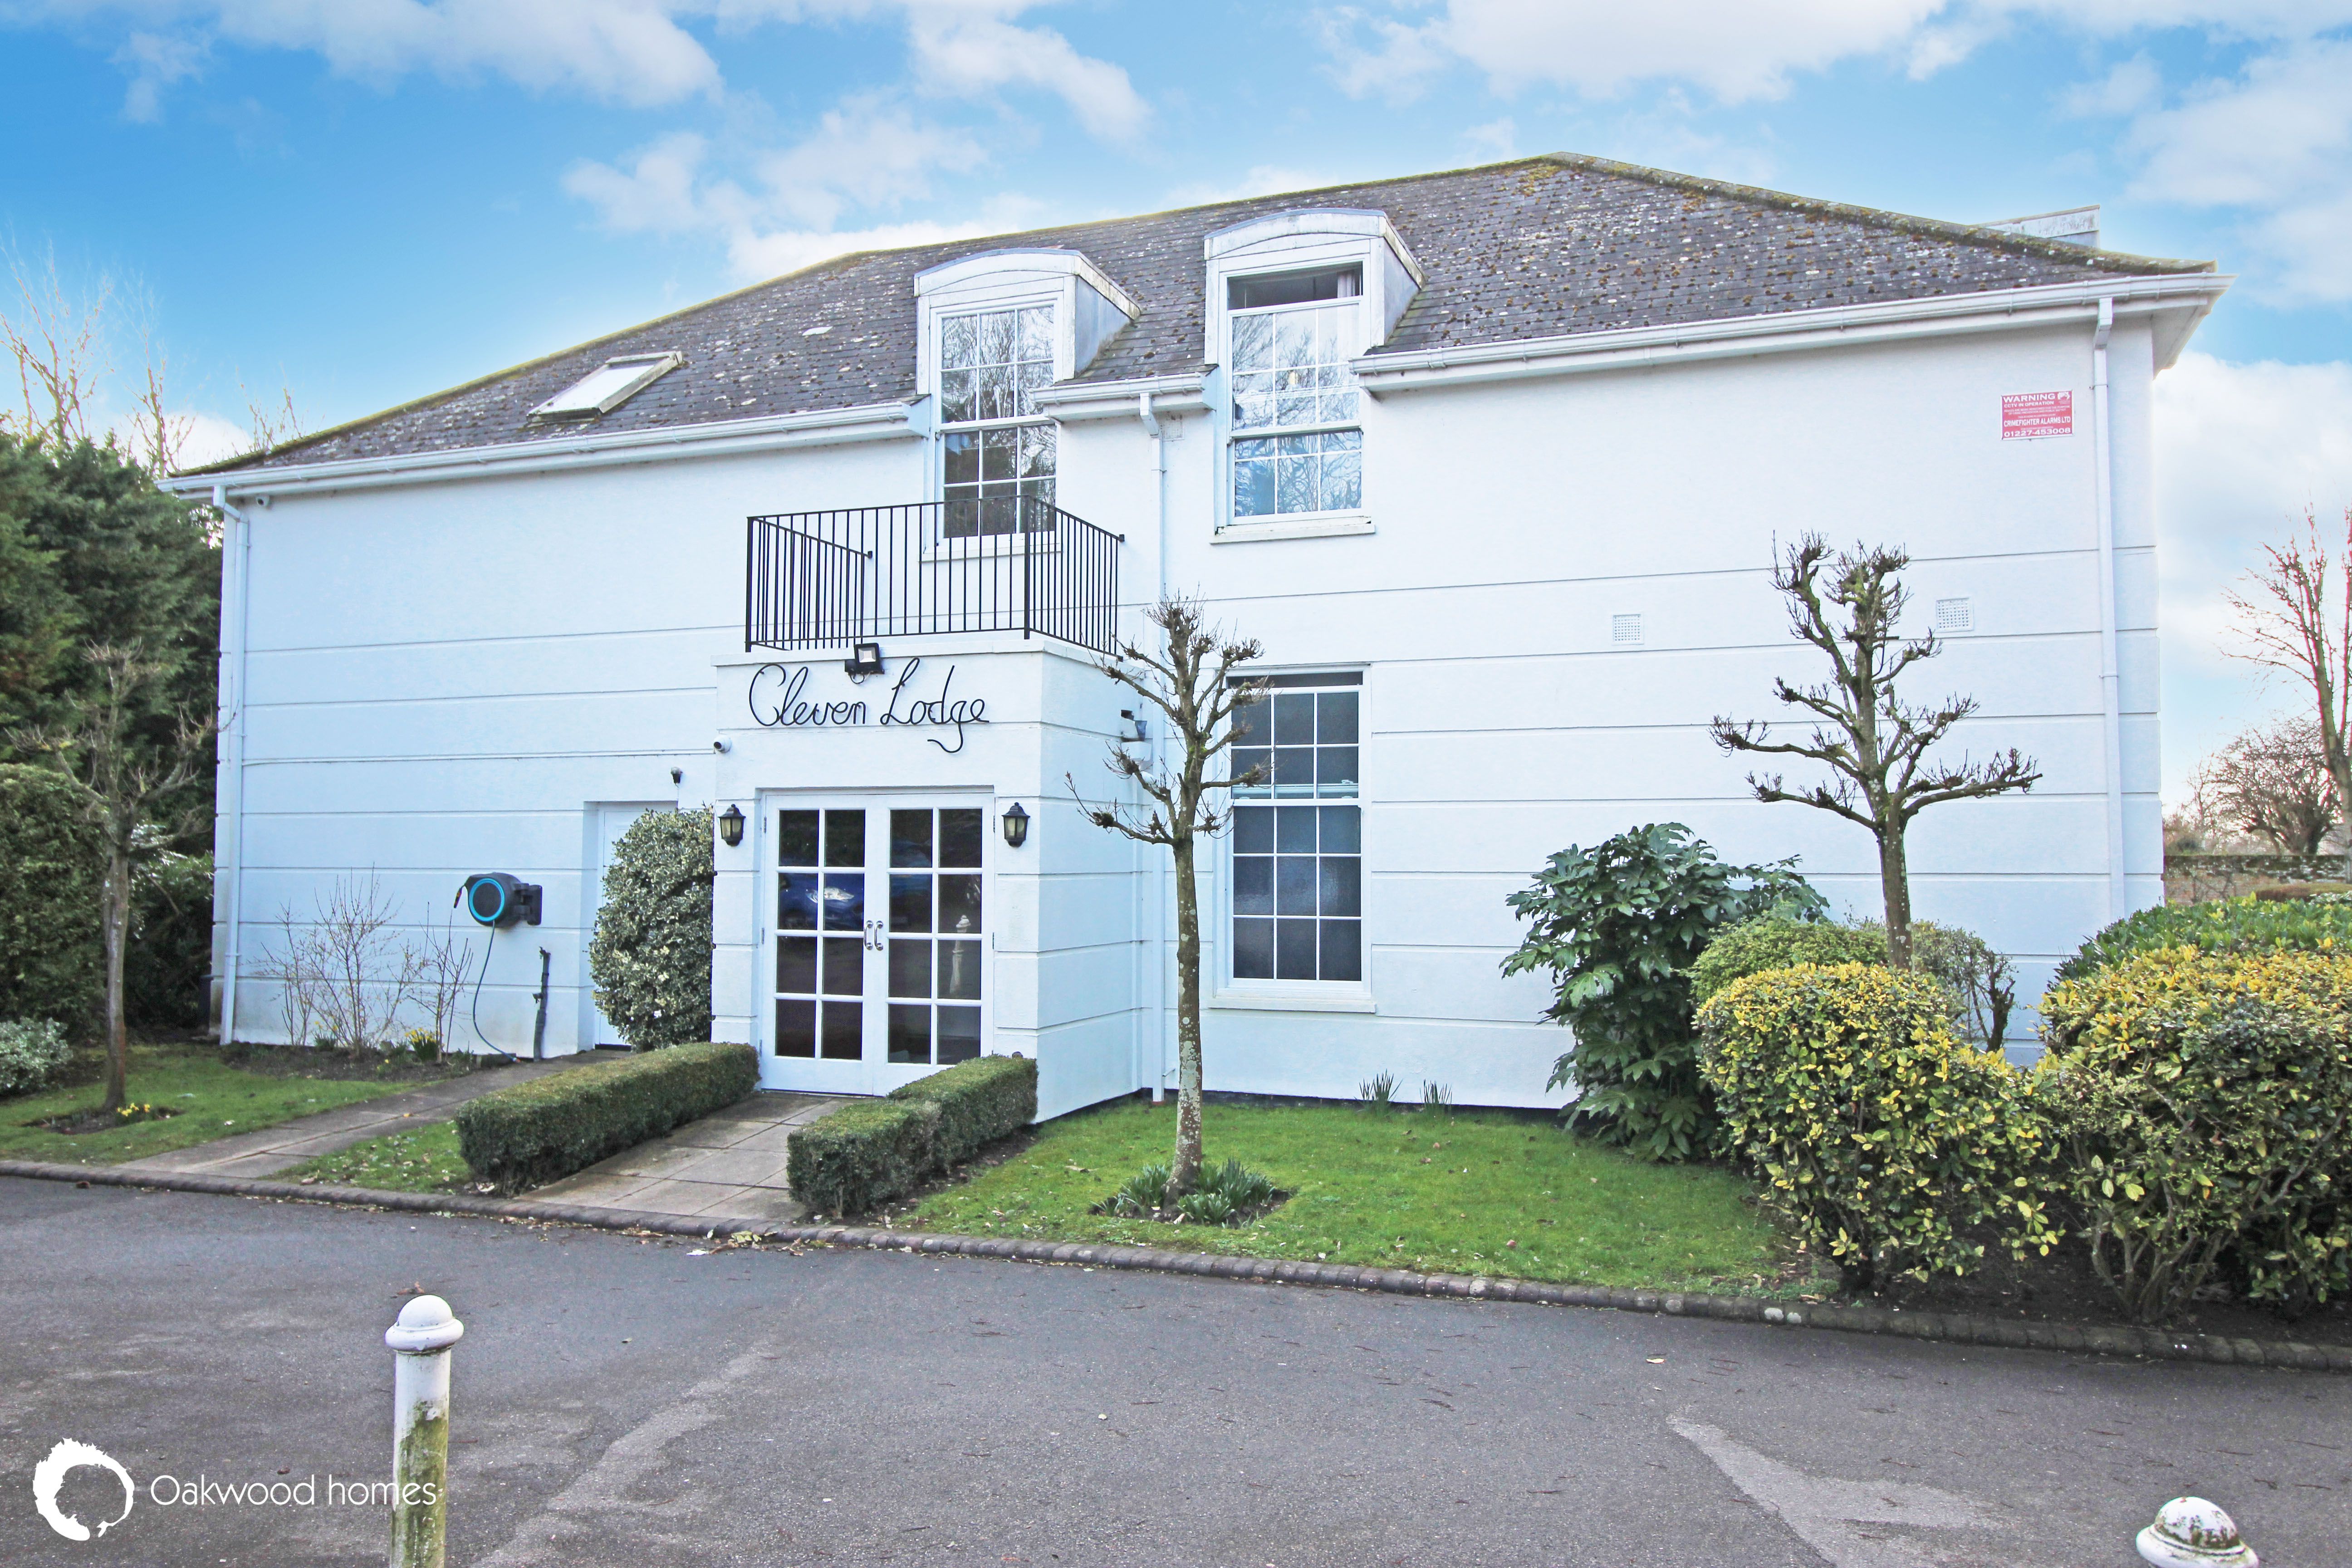 2 bed flat for sale in Cleven Lodge, Birchington  - Property Image 1